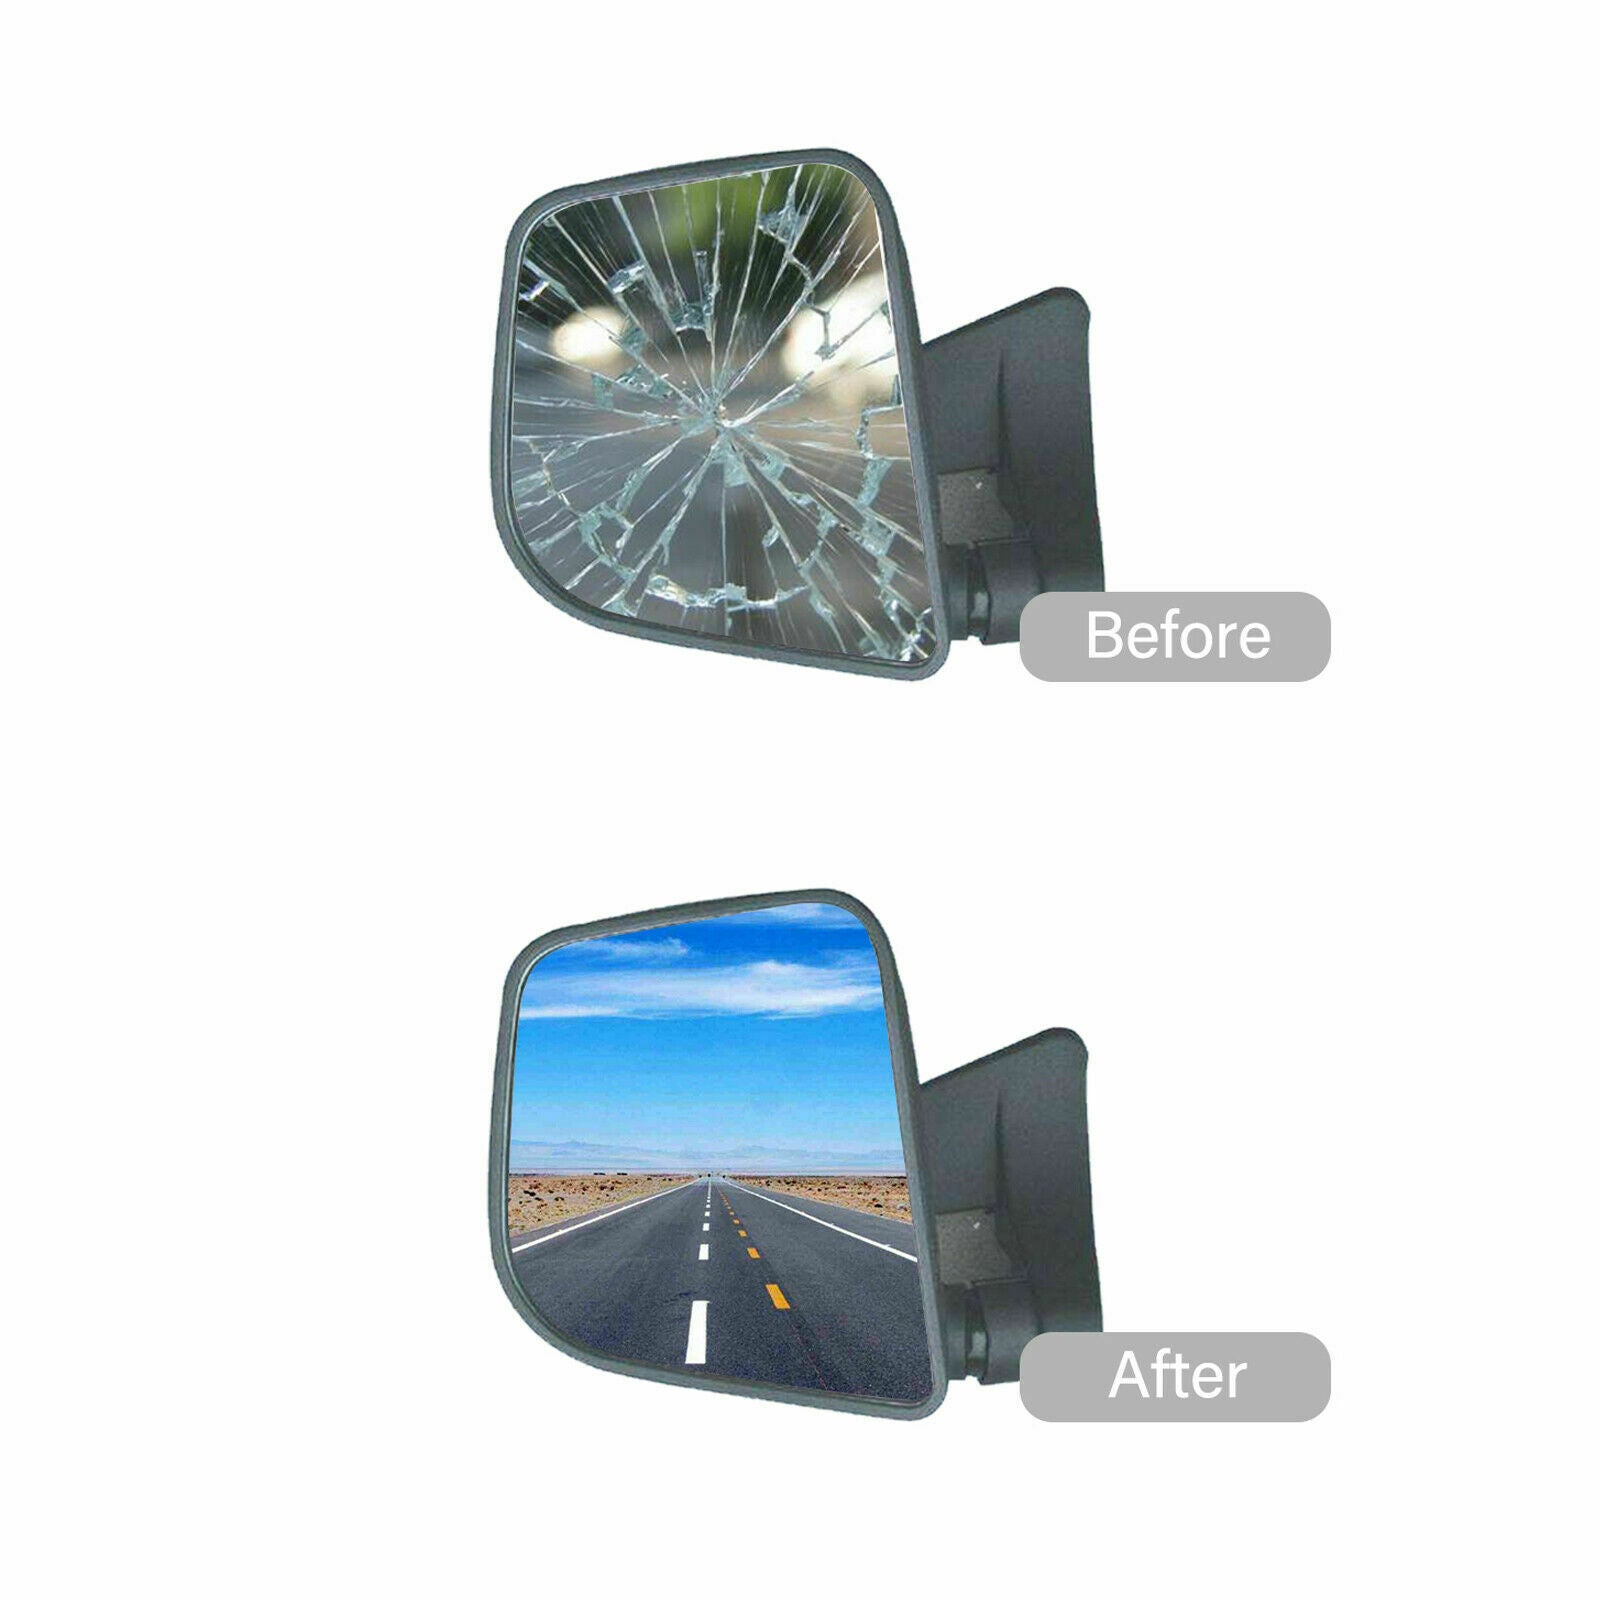 WLLW Upper Towing Mirror Glass Replacement for Ford 2013-2014 F150/2008-2020 F250 F350 F450 Super Duty/2017-2020 F550 Super Duty/2016-2021 F650 F750, Driver Left Side LH/Passenger Right Side RH/The Both Sides Flat M-0010